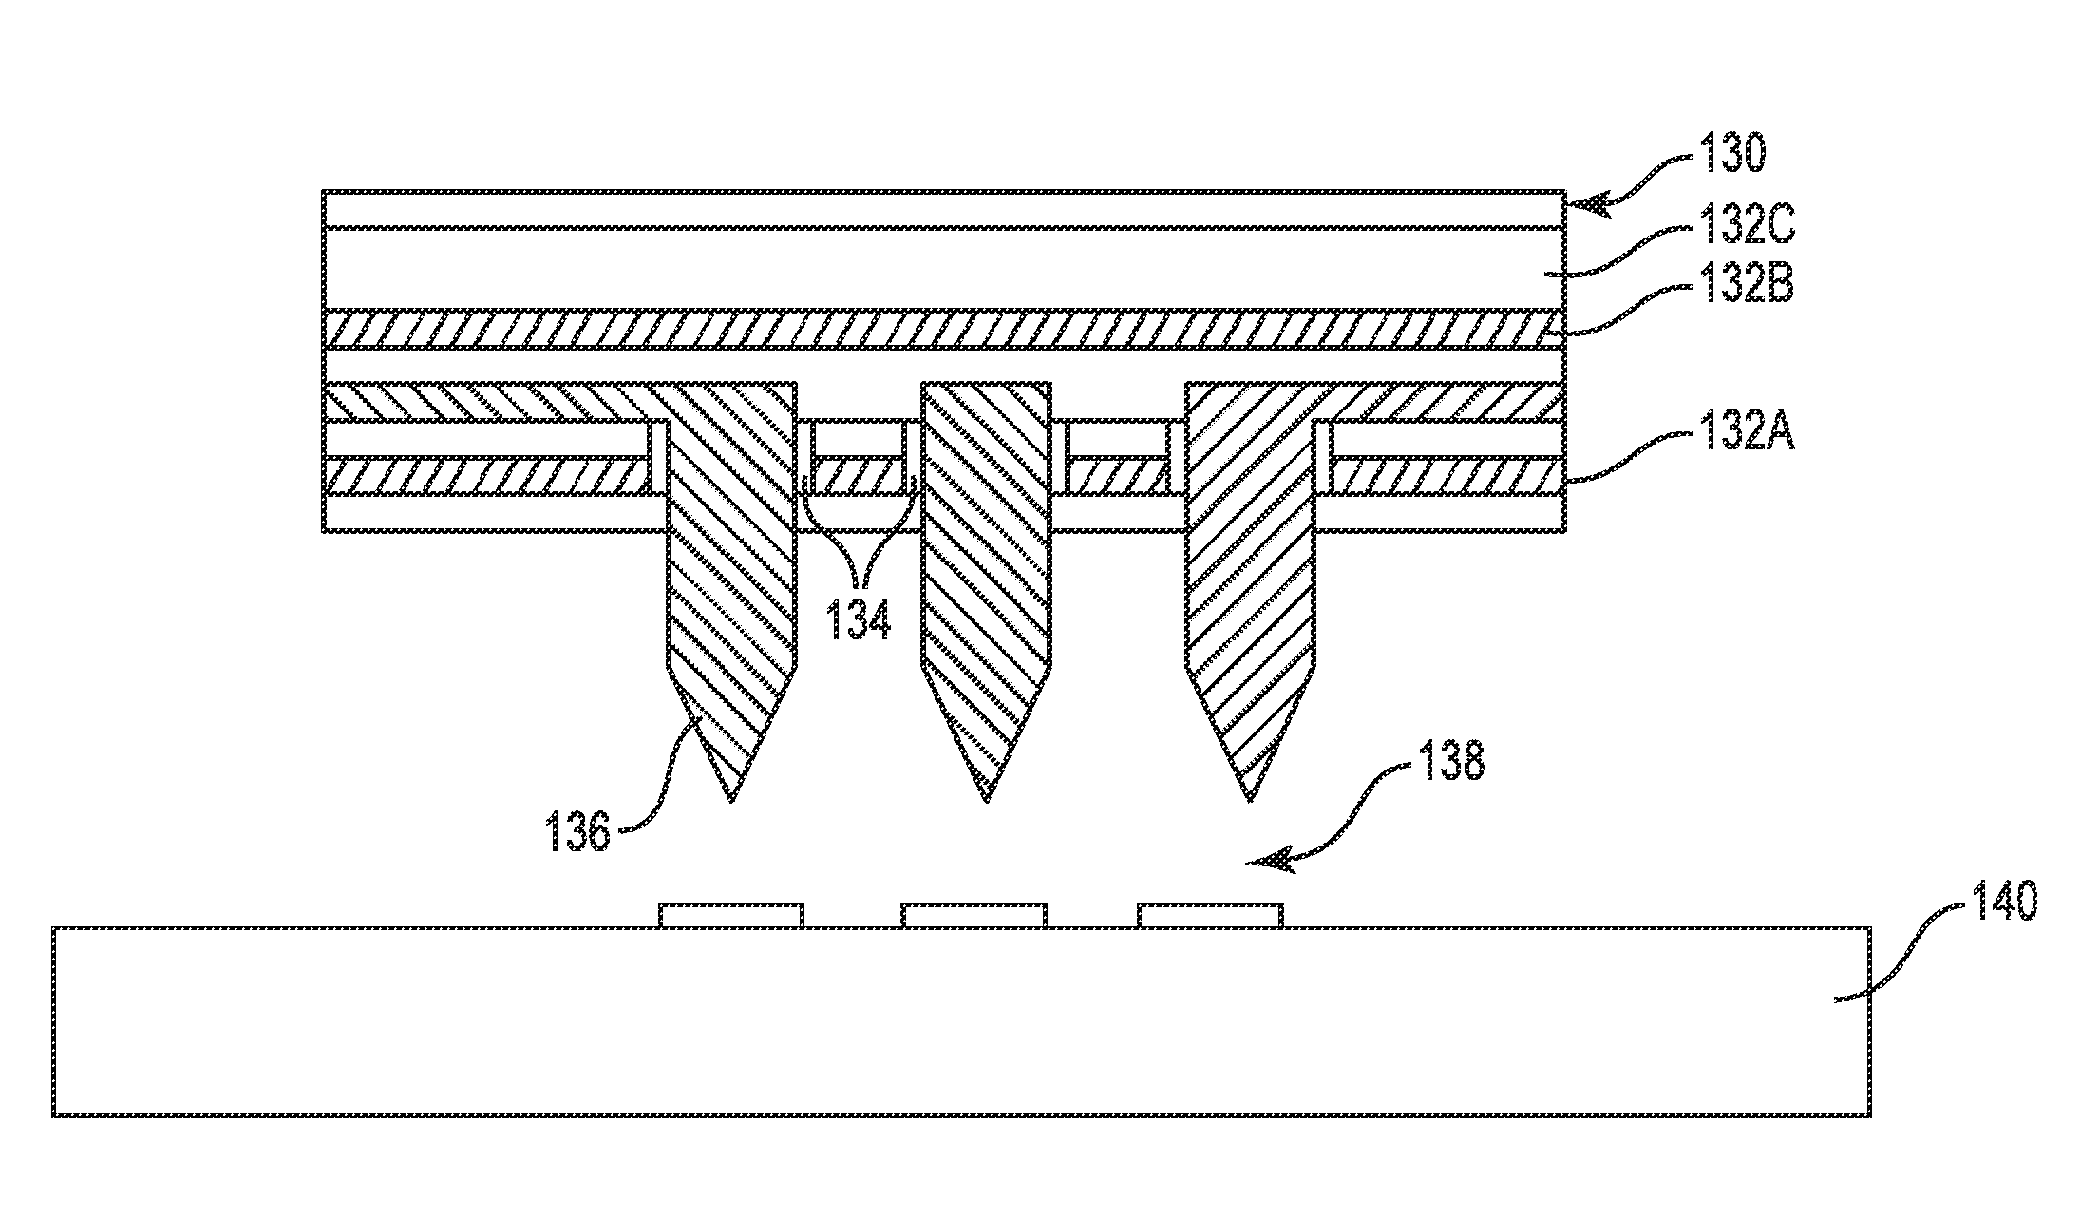 Compliant wafer level probe assembly